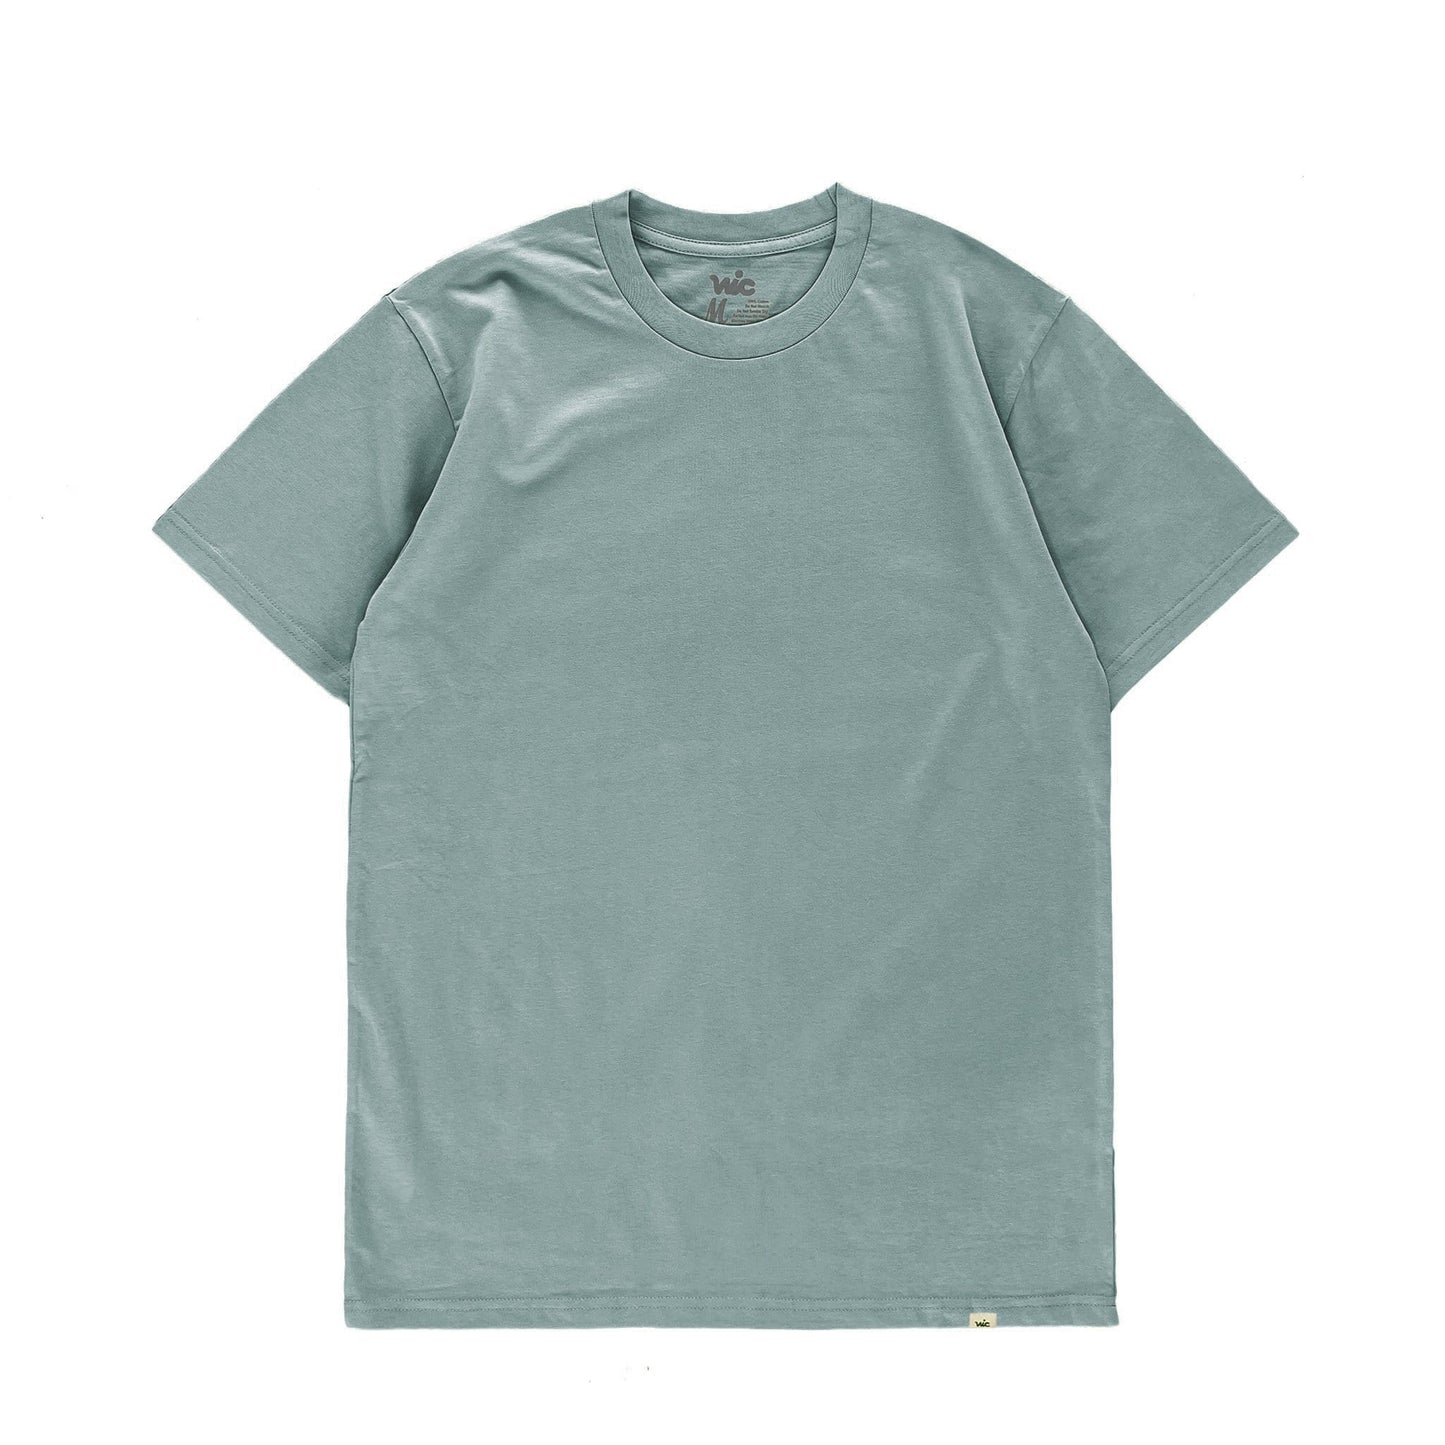 VIC CLASSIC TEE - MINERAL